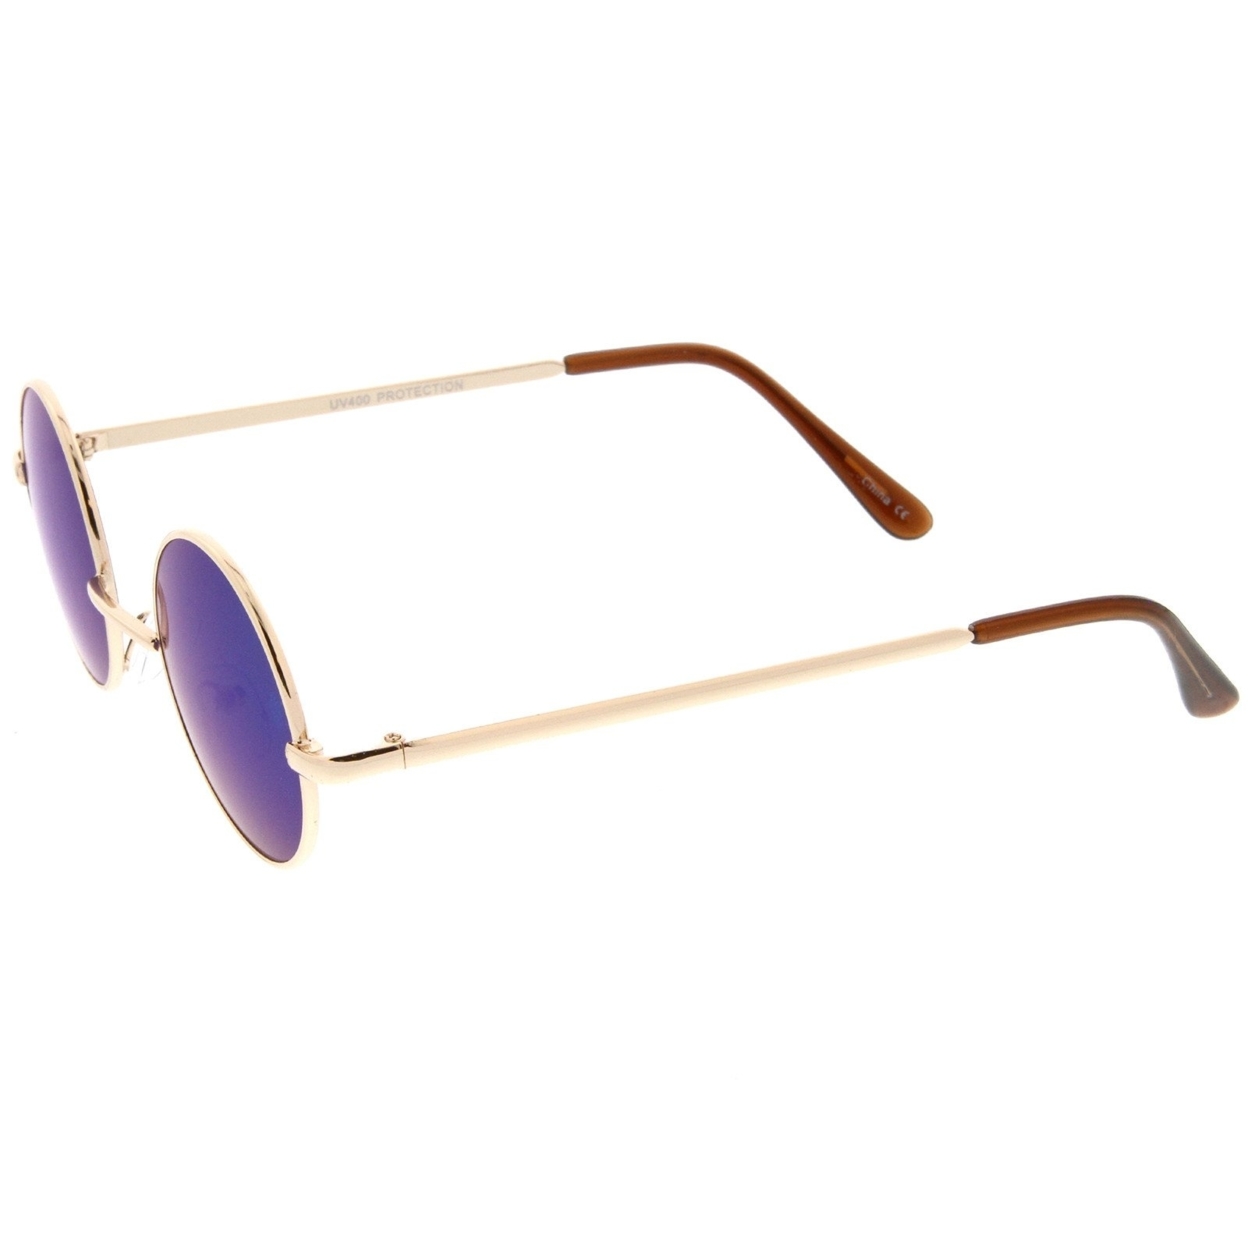 Small Retro Lennon Inspired Style Colored Mirror Lens Round Metal Sunglasses 41mm - Gold / Gold Mirror